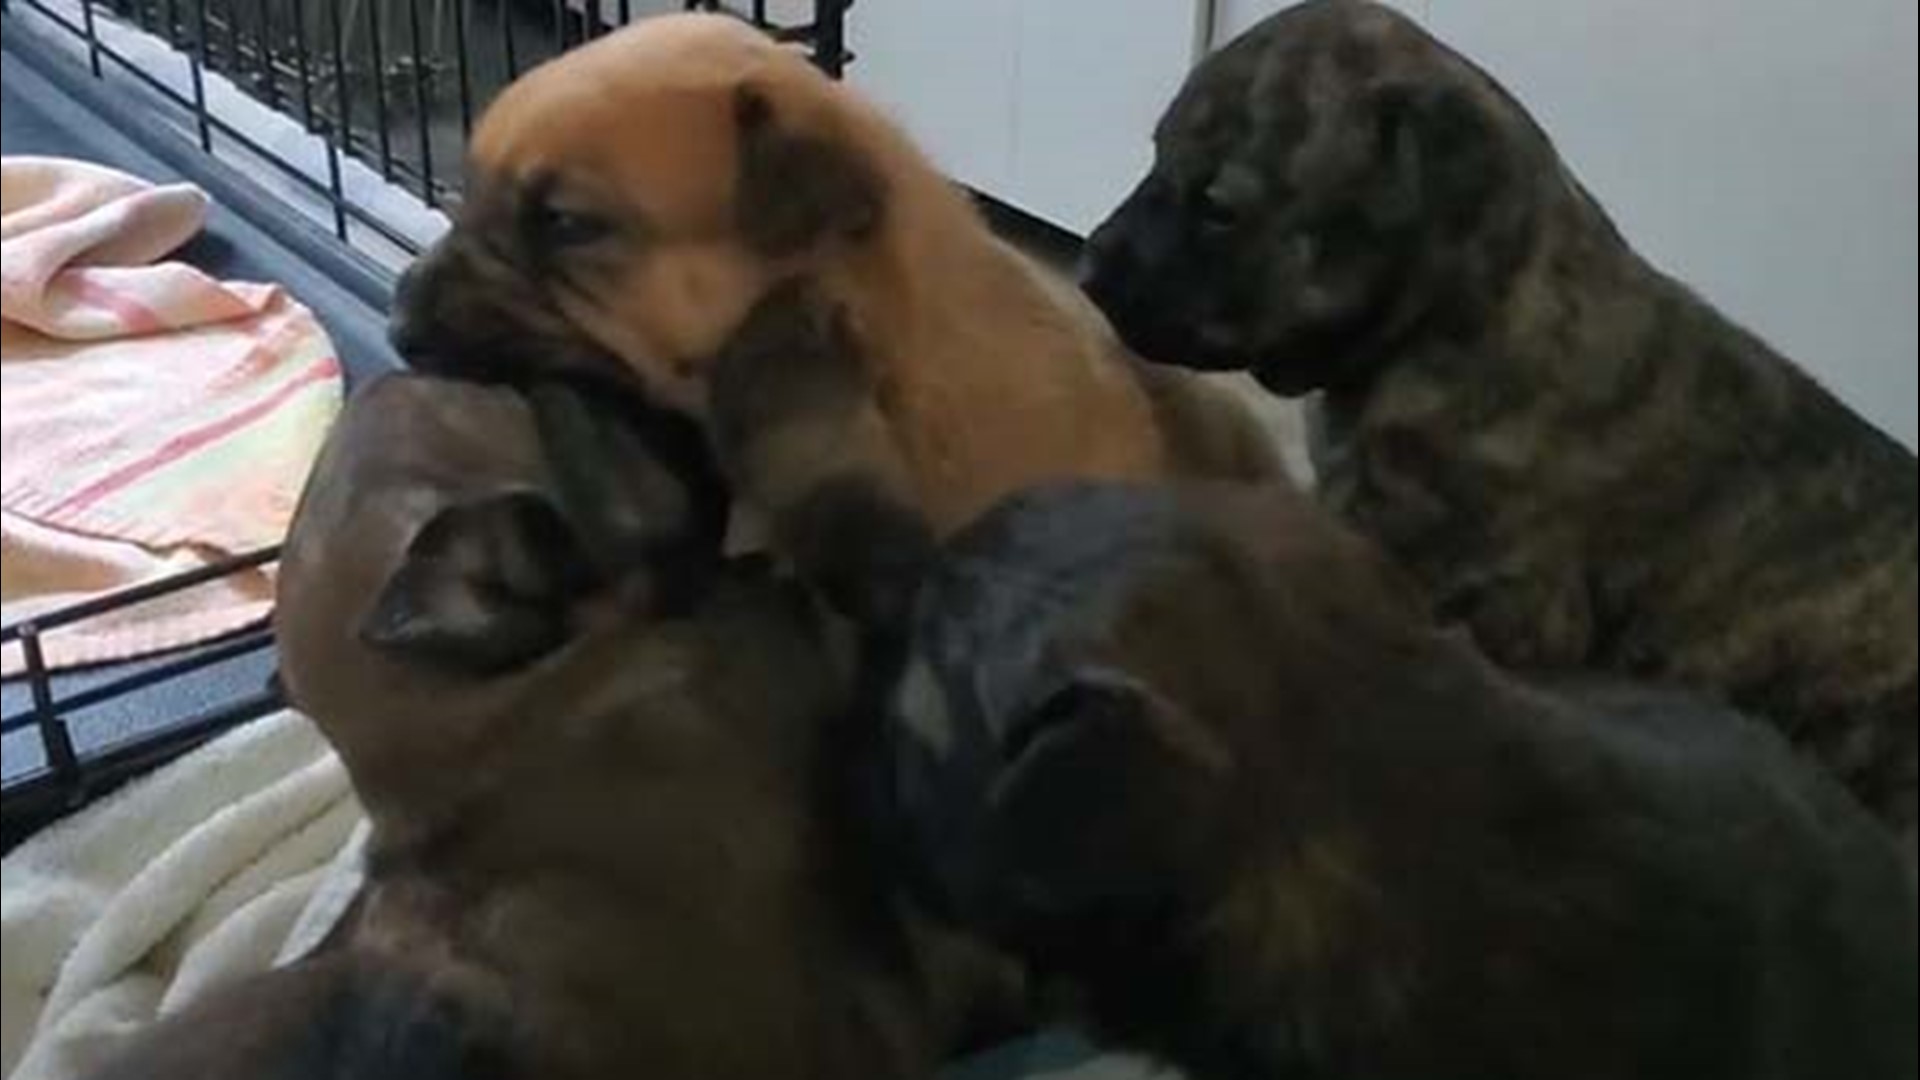 We have great news about the stray dog and her four puppies that were rescued from a Houston storm drain last month.